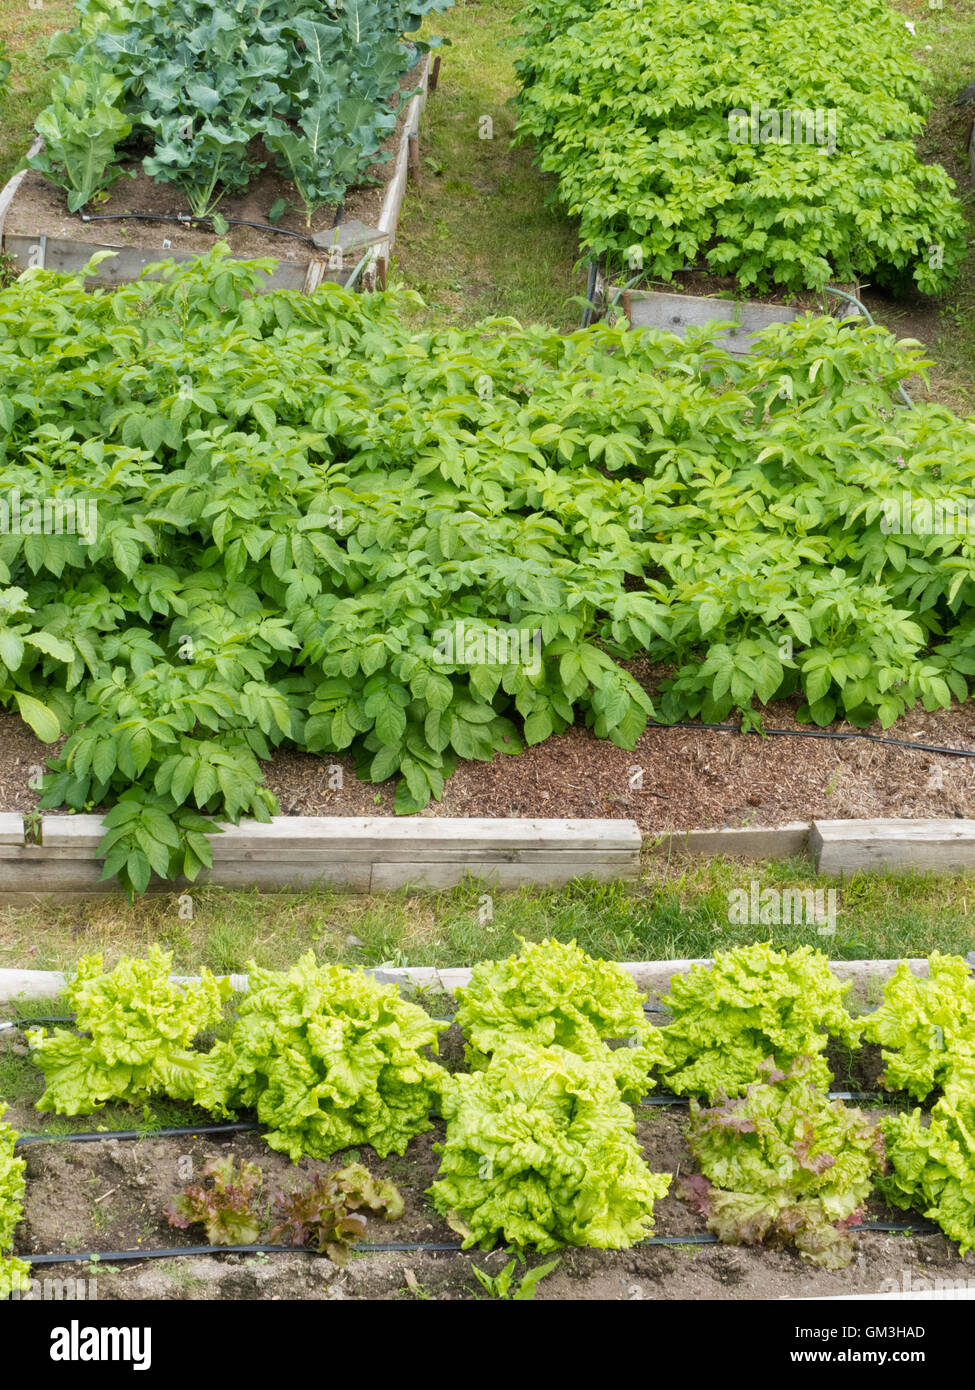 Raised beds of various vegetable plants potatoes Stock Photo